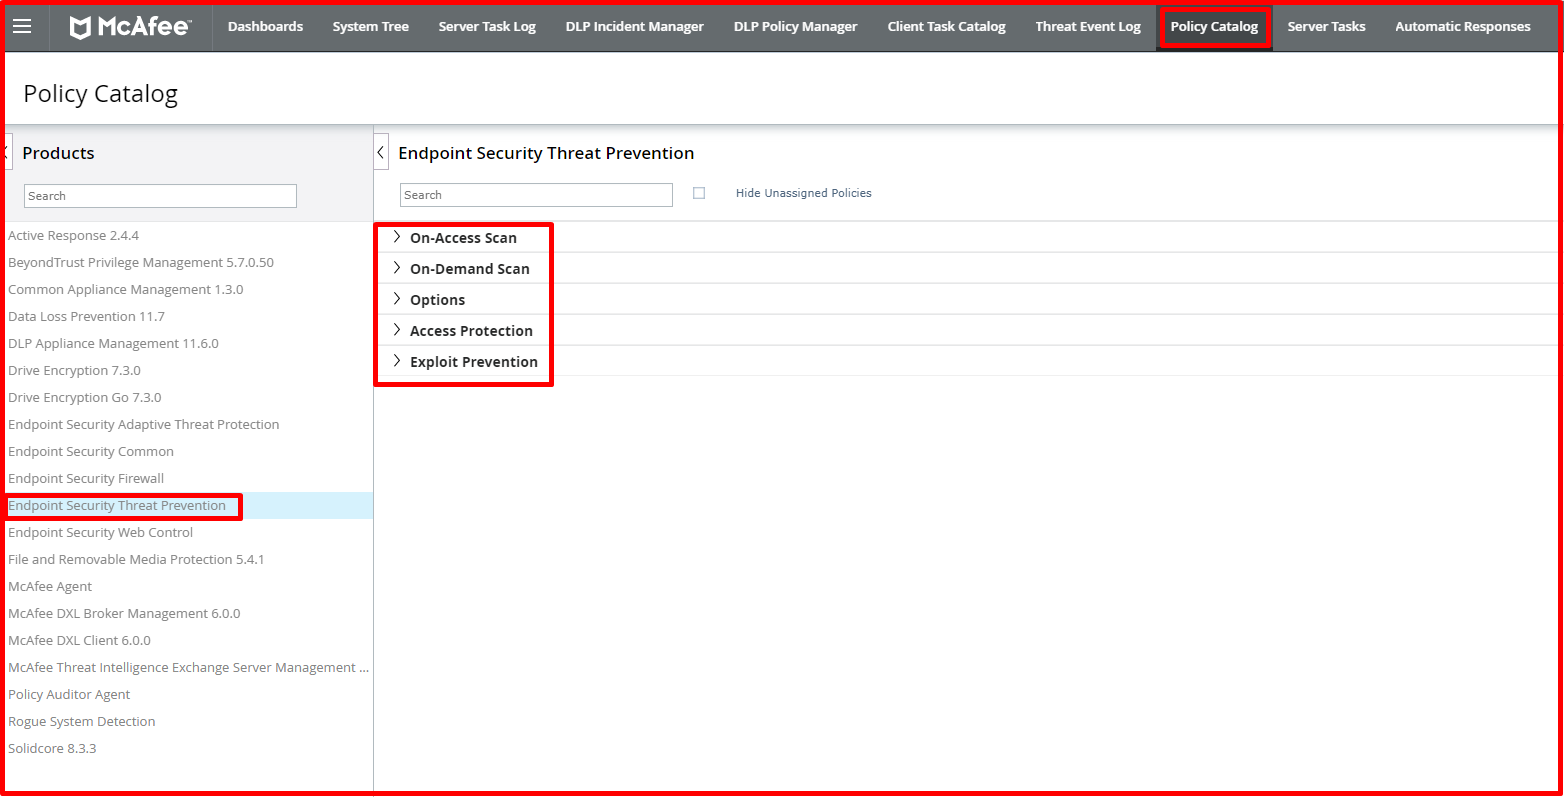 McAfee Endpoint Security Threat Prevention